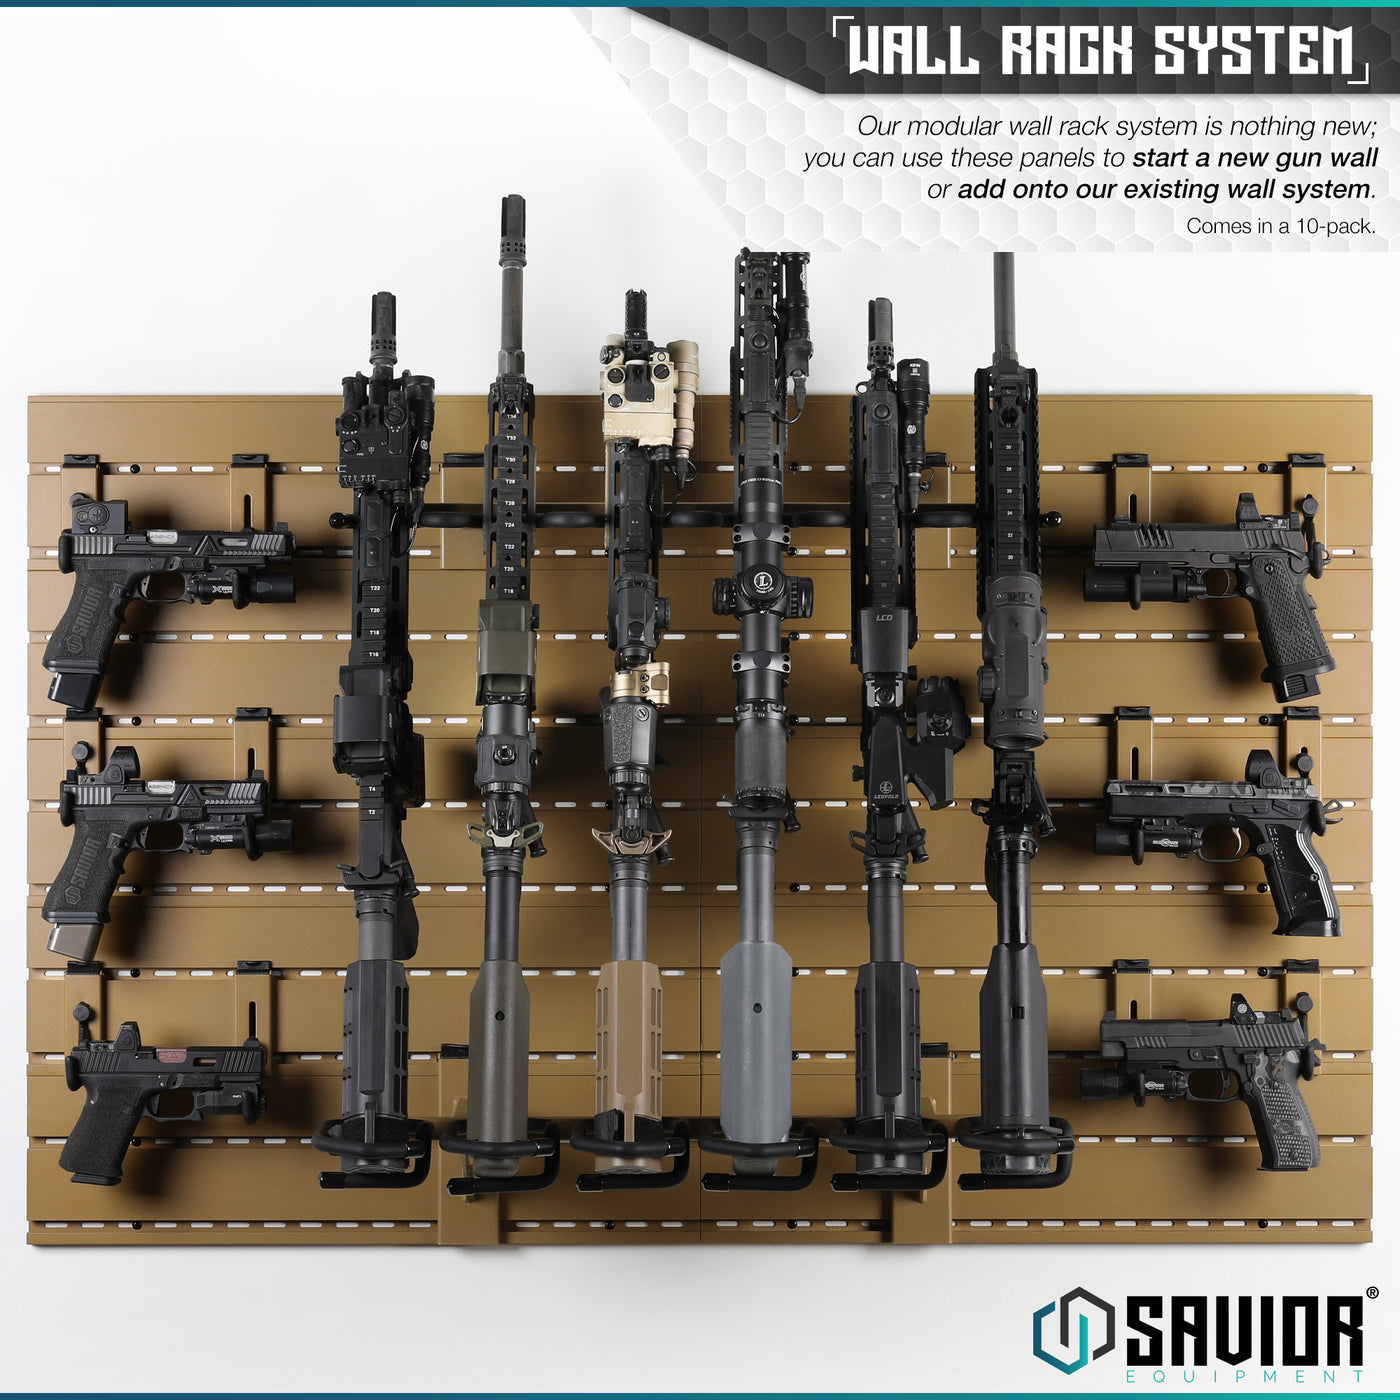 Wall Rack System - Our modular wall rack system is nothing new; you can use these panels to start a new gun wall or add onto our existing wall system. Comes in a 10-pack.